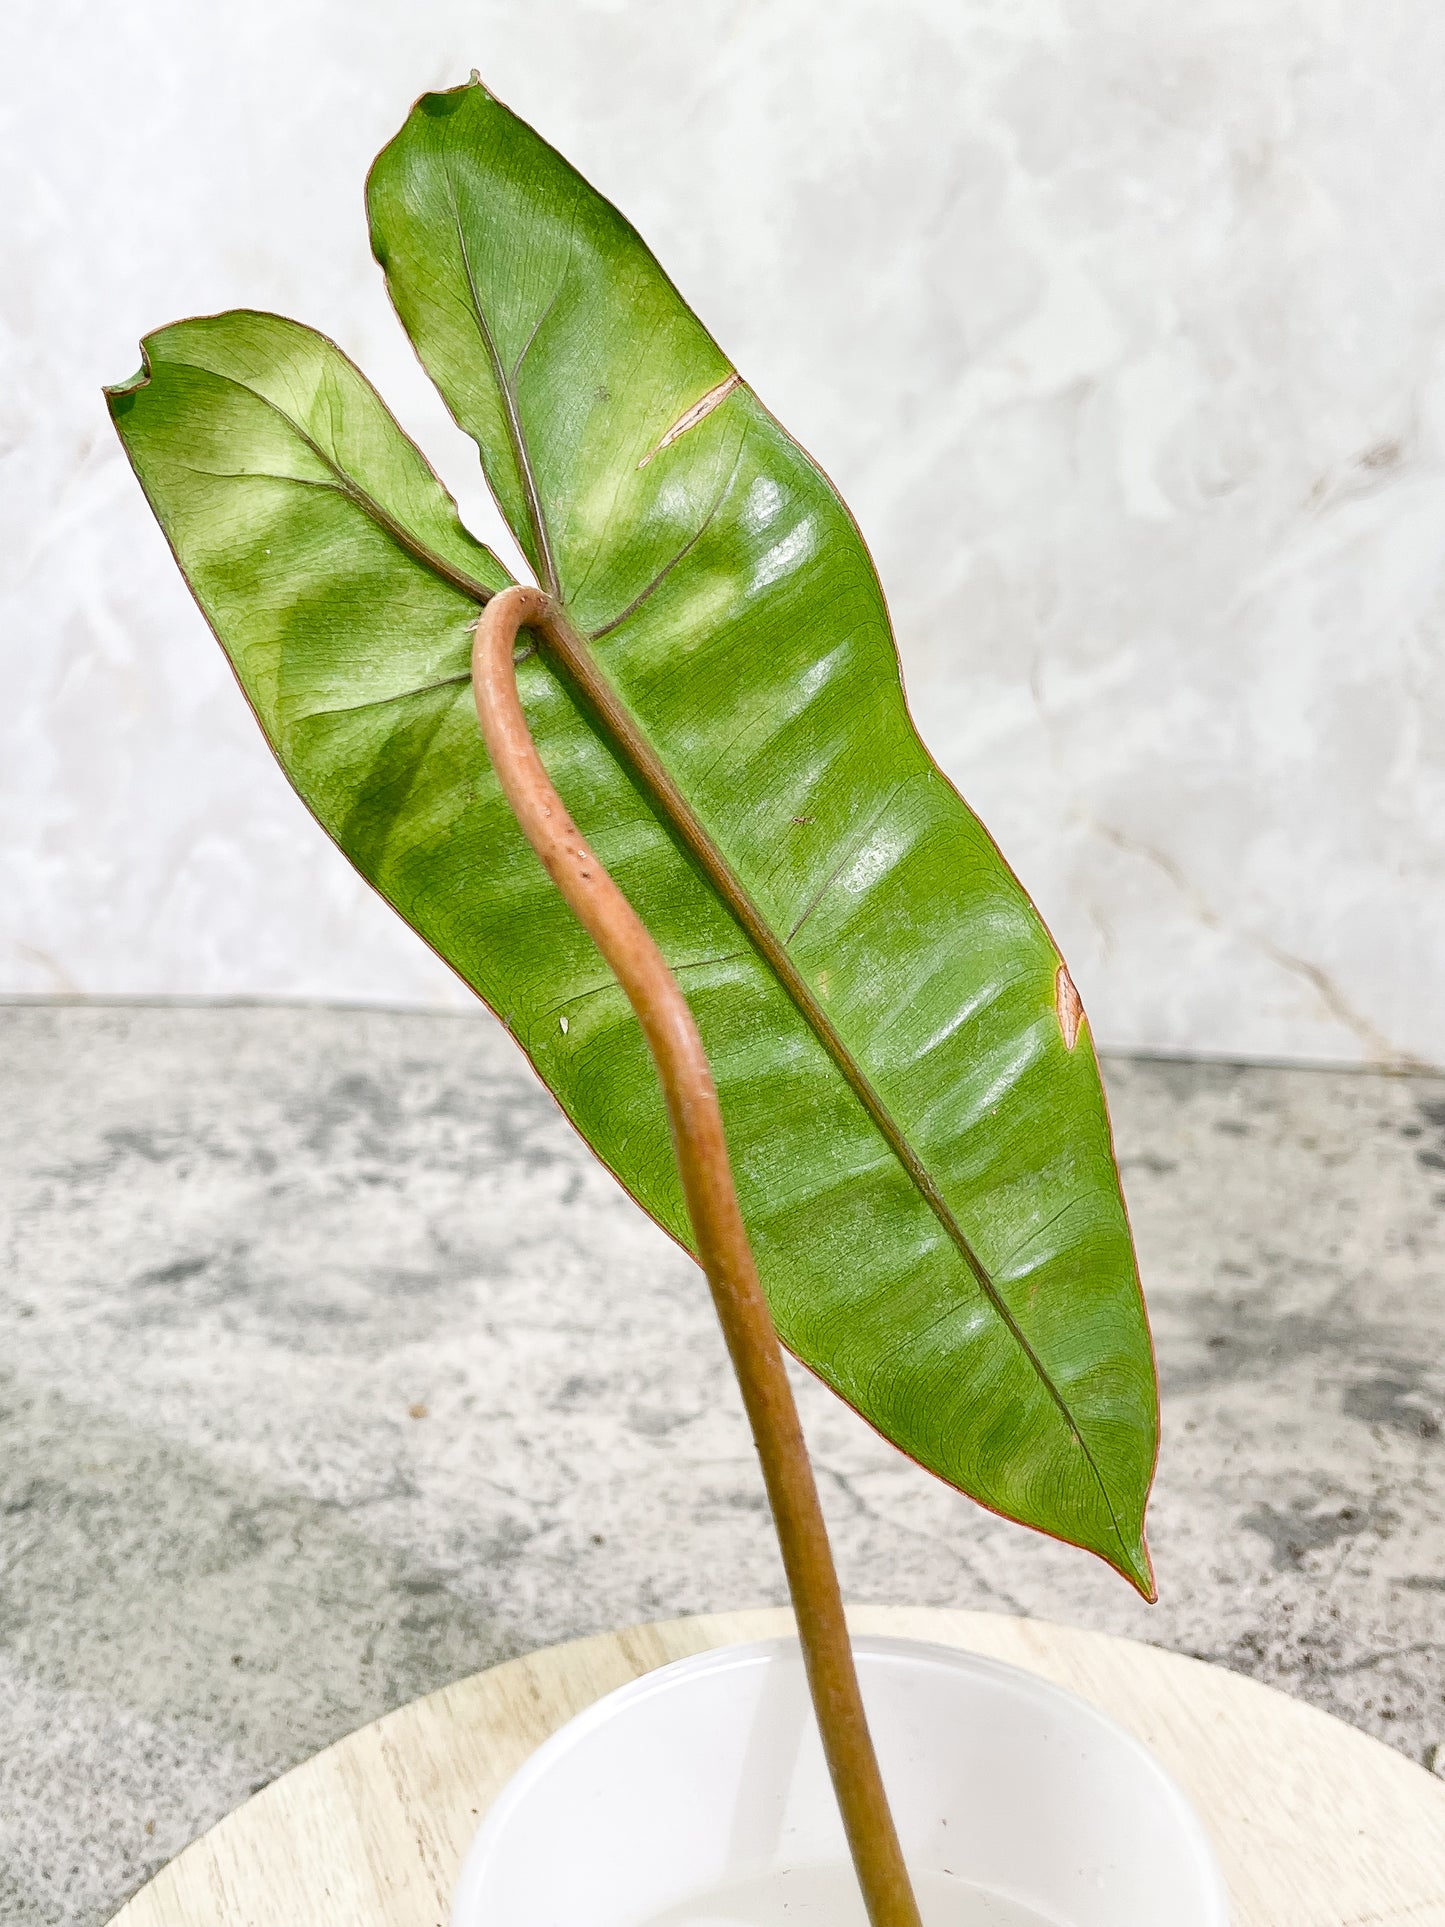 Philodendron Billietiae cutting with 1 leaf rooting